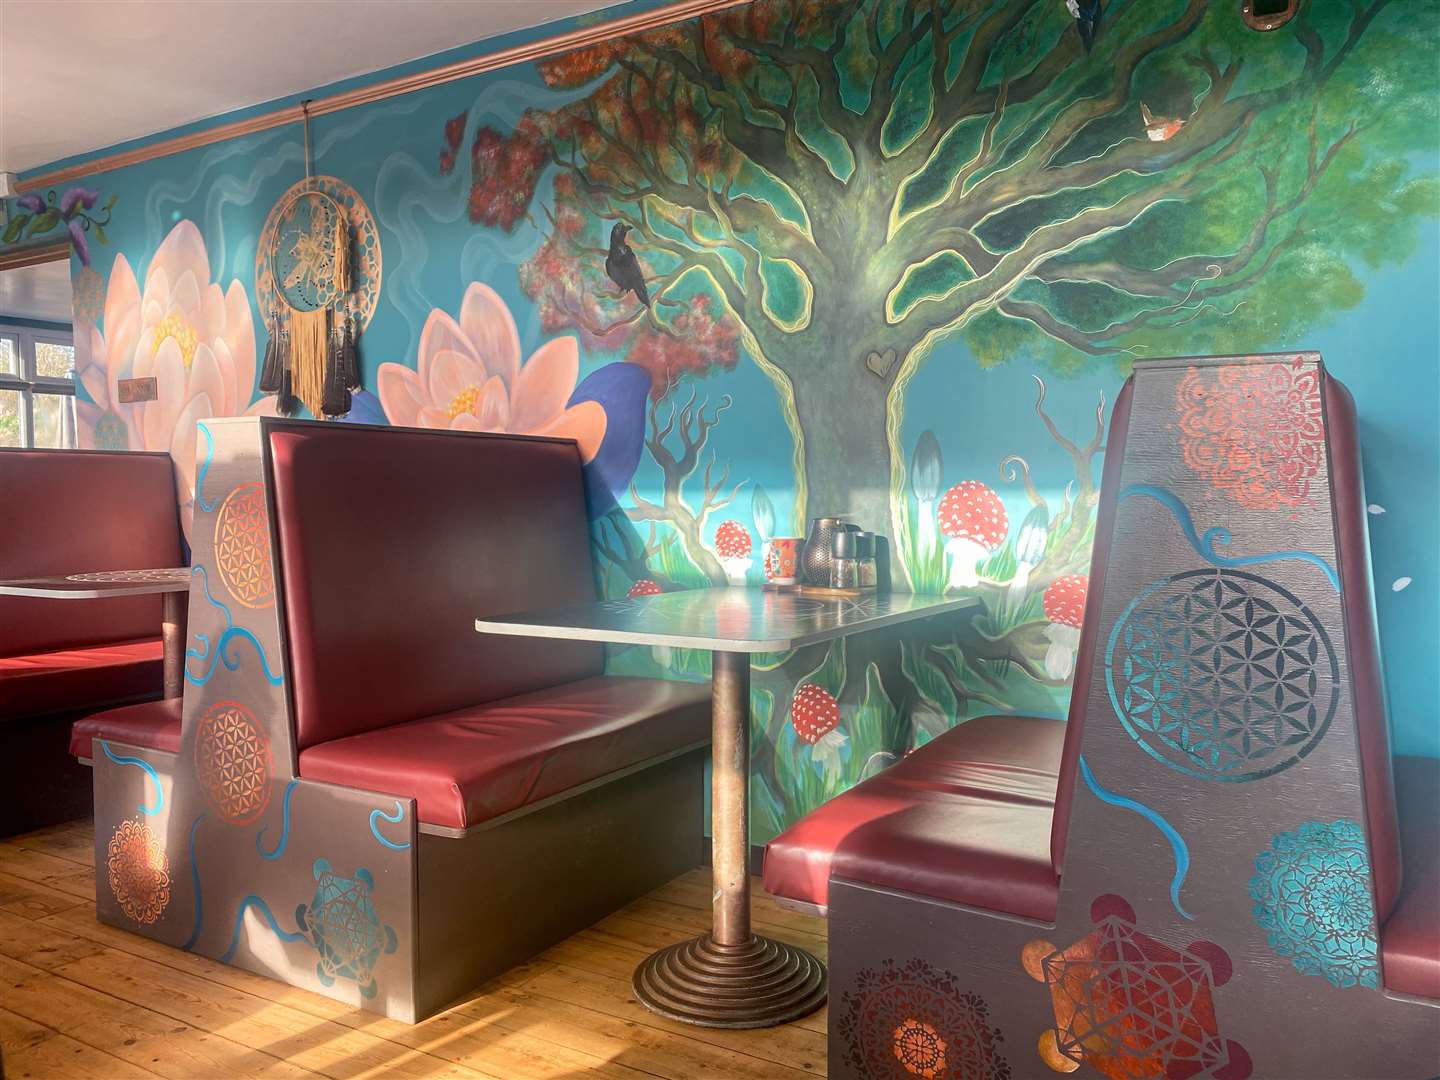 The quirky cafe is full of colour and eclectic decorations